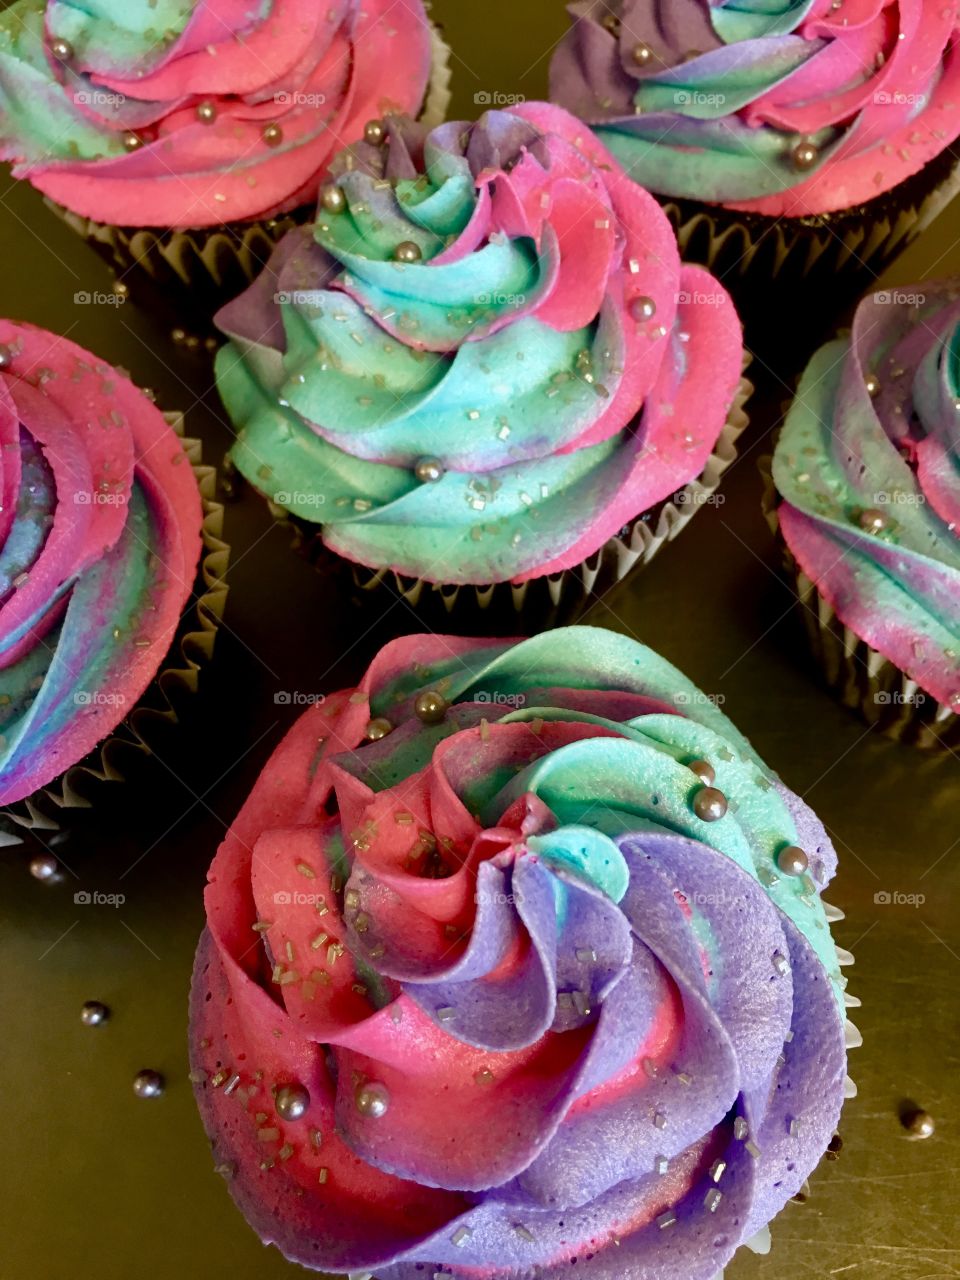 Pink, purple and turquoise swirled frosting on cupcakes with silver sprinkles.